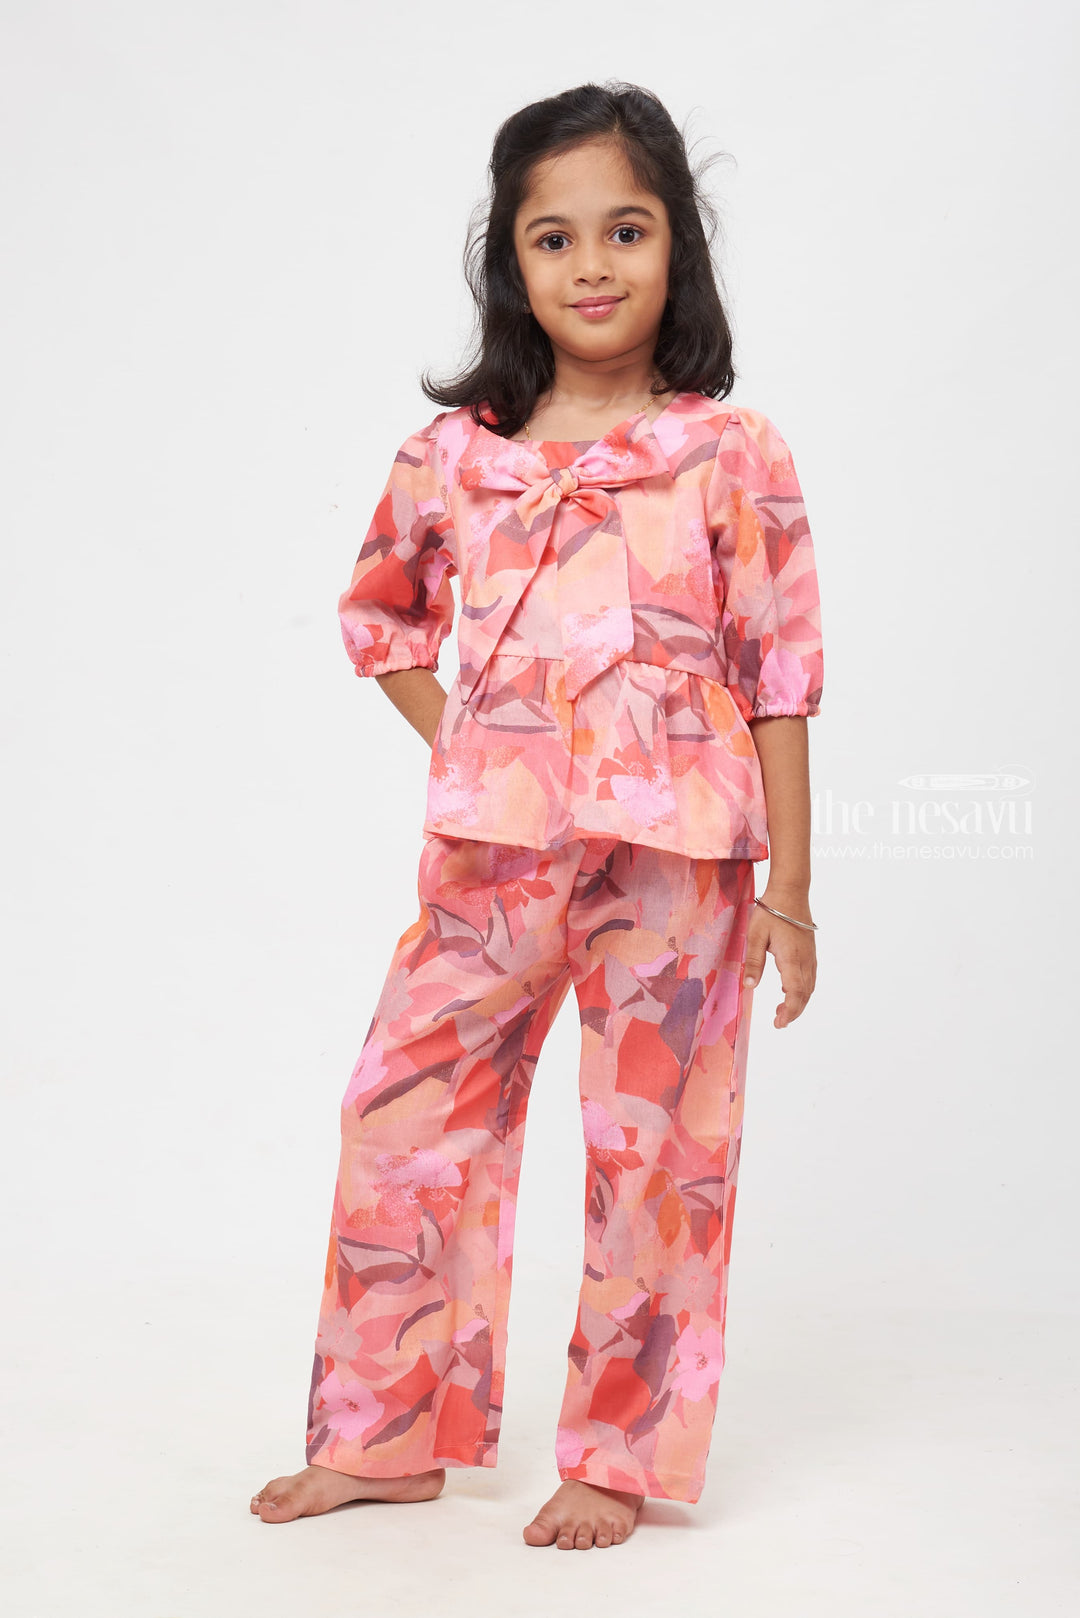 The Nesavu Girls Sharara / Plazo Set Blossom Radiance Tiered Peplum Set with Abstract Floral Design for Young Fashionistas Nesavu 24 (5Y) / Pink / linen cotton GPS212A-24 Abstract Floral Tiered Peplum Set | Blooming Chic Kids Collection | Vibrant Youthful Outfits - The Nesavu